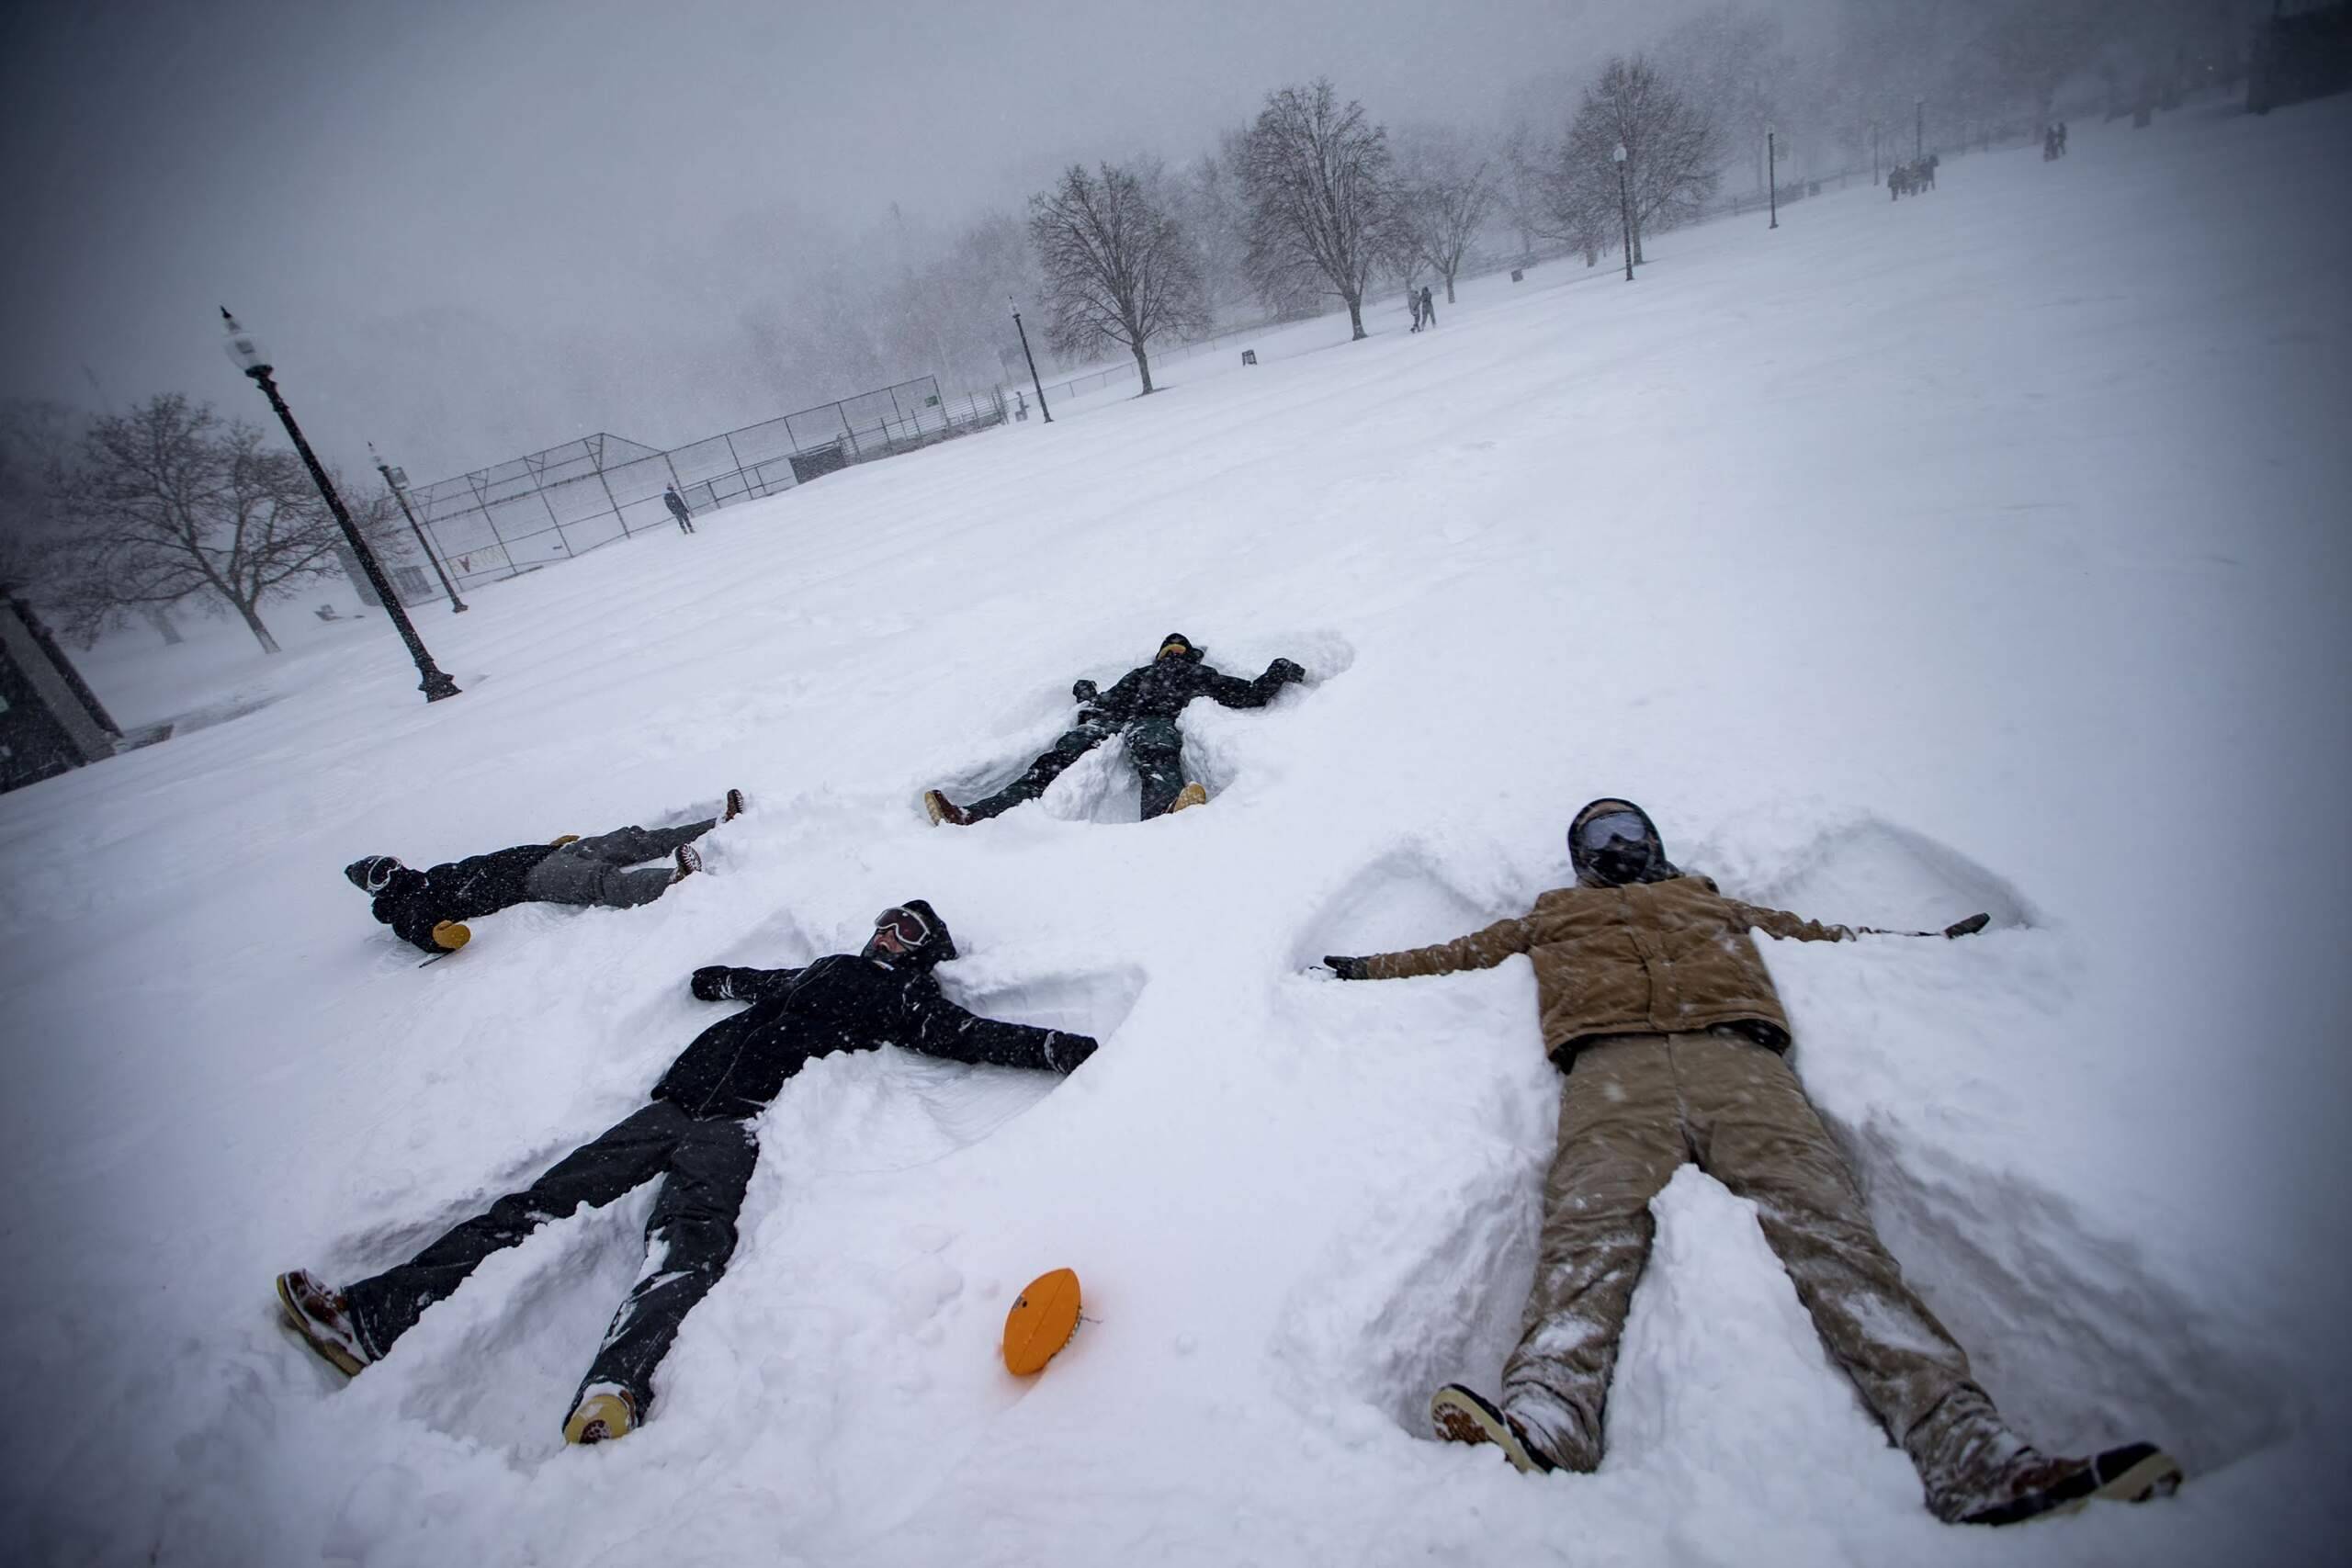 Four Wentworth students make snow angels in the snow in the Boston Common during the snowstorm. (Jesse Costa/WBUR)